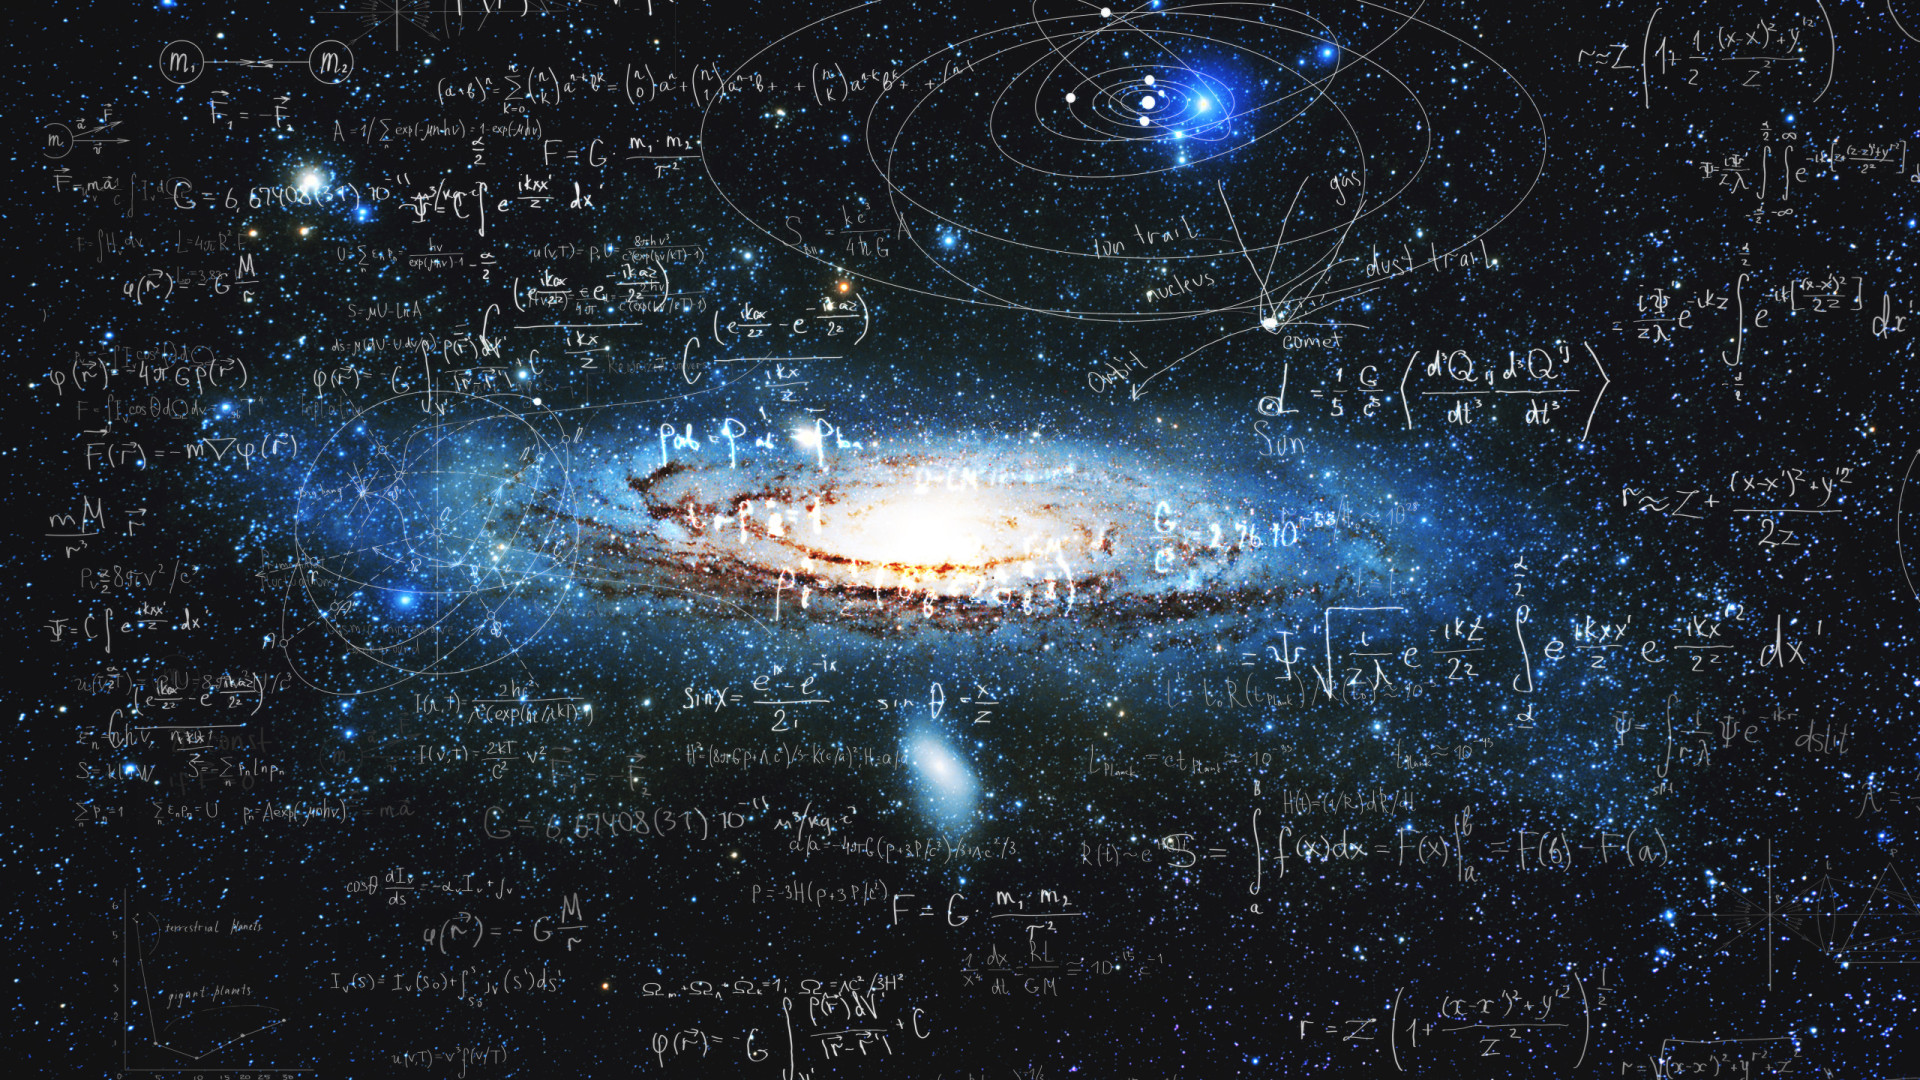 <p>While relativity describes the behavior of large objects like humans and galaxies, quantum mechanics explains the very small: smaller than atoms, i.e. electrons and photons.</p><p>You may also like:<a href="https://www.starsinsider.com/n/458051?utm_source=msn.com&utm_medium=display&utm_campaign=referral_description&utm_content=621991en-en"> Vintage photos of stars with their babies</a></p>